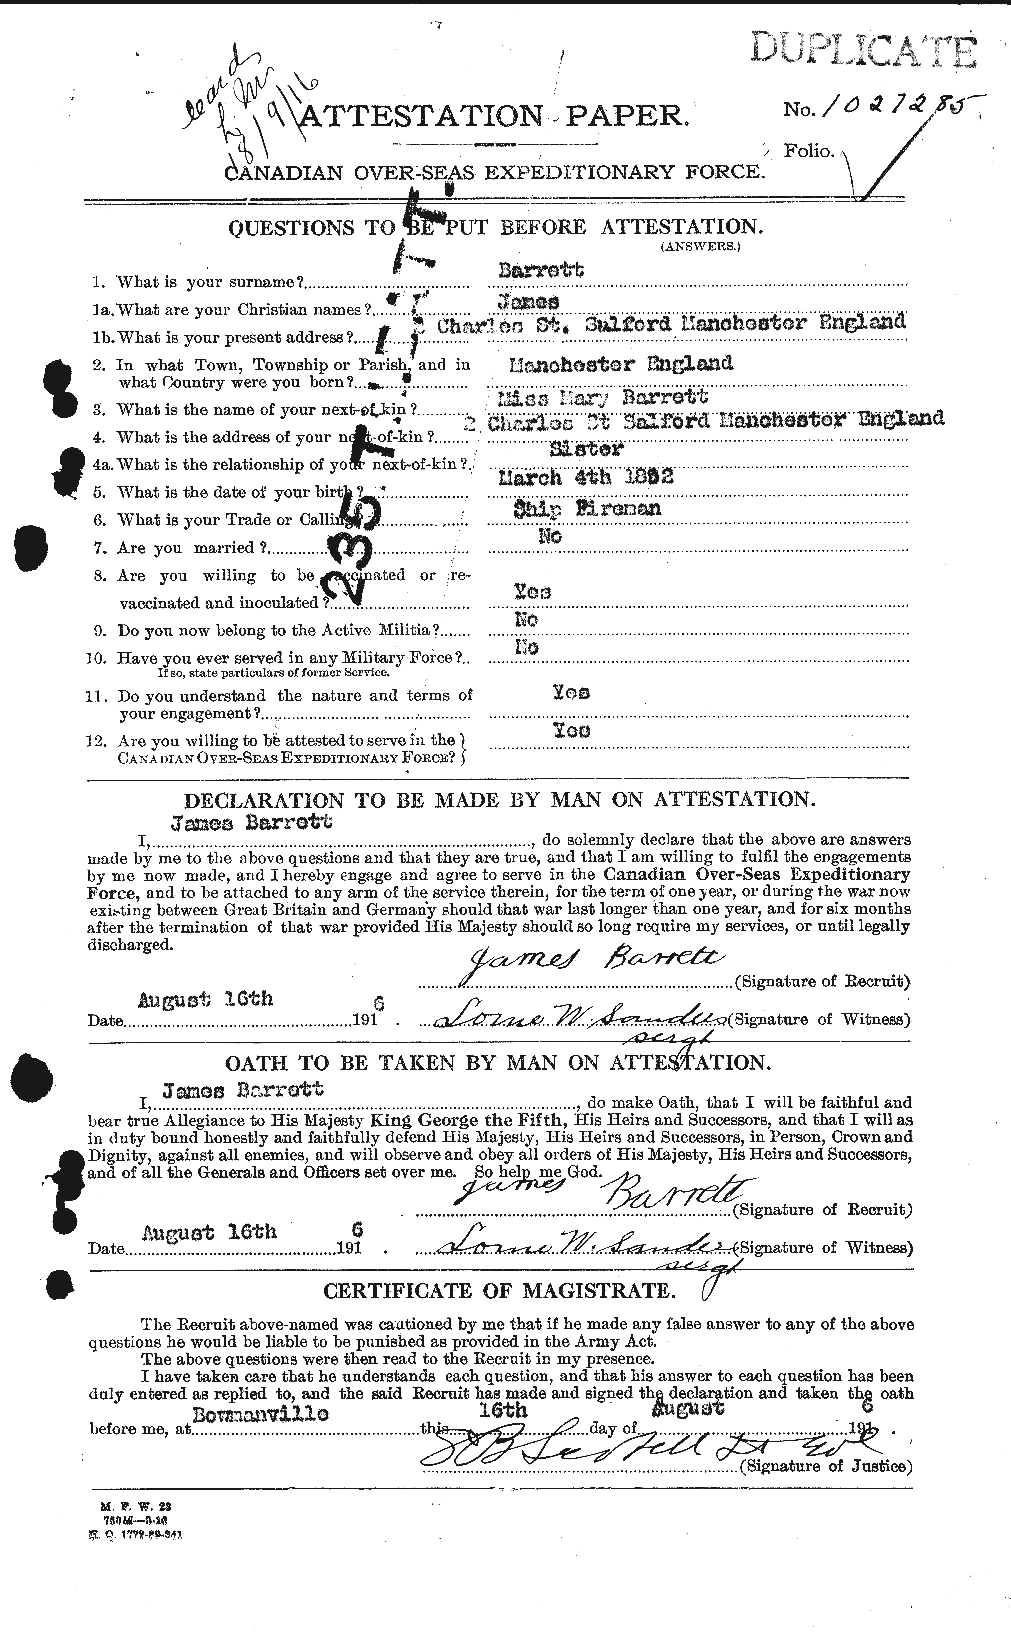 Personnel Records of the First World War - CEF 220262a